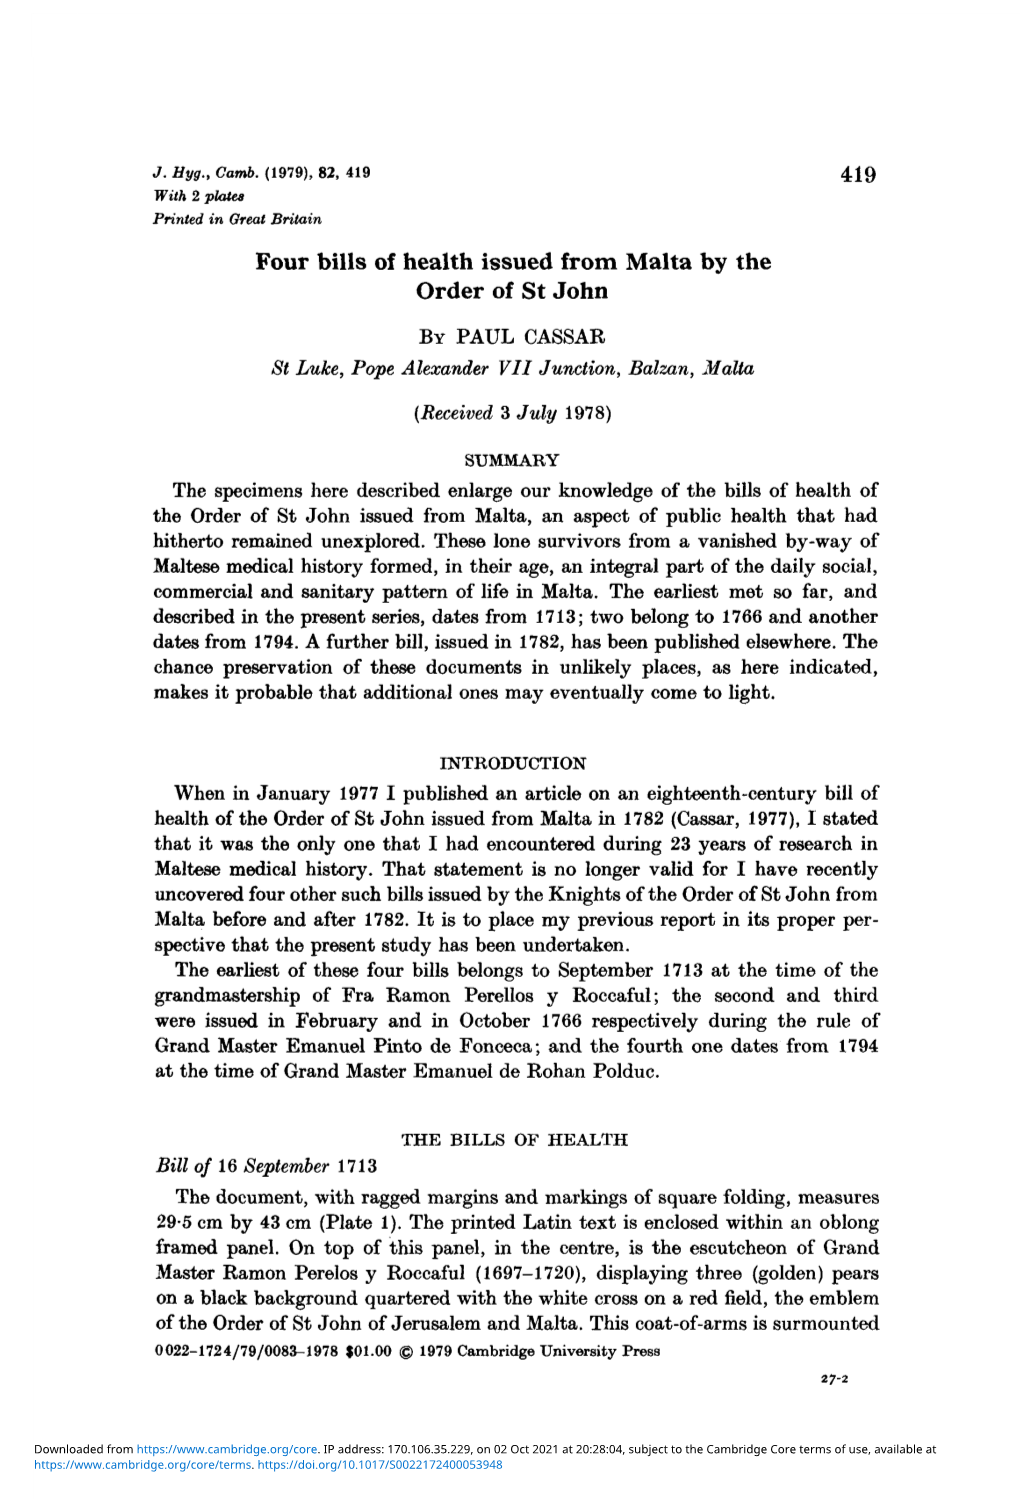 Four Bills of Health Issued from Malta by the Order of St John